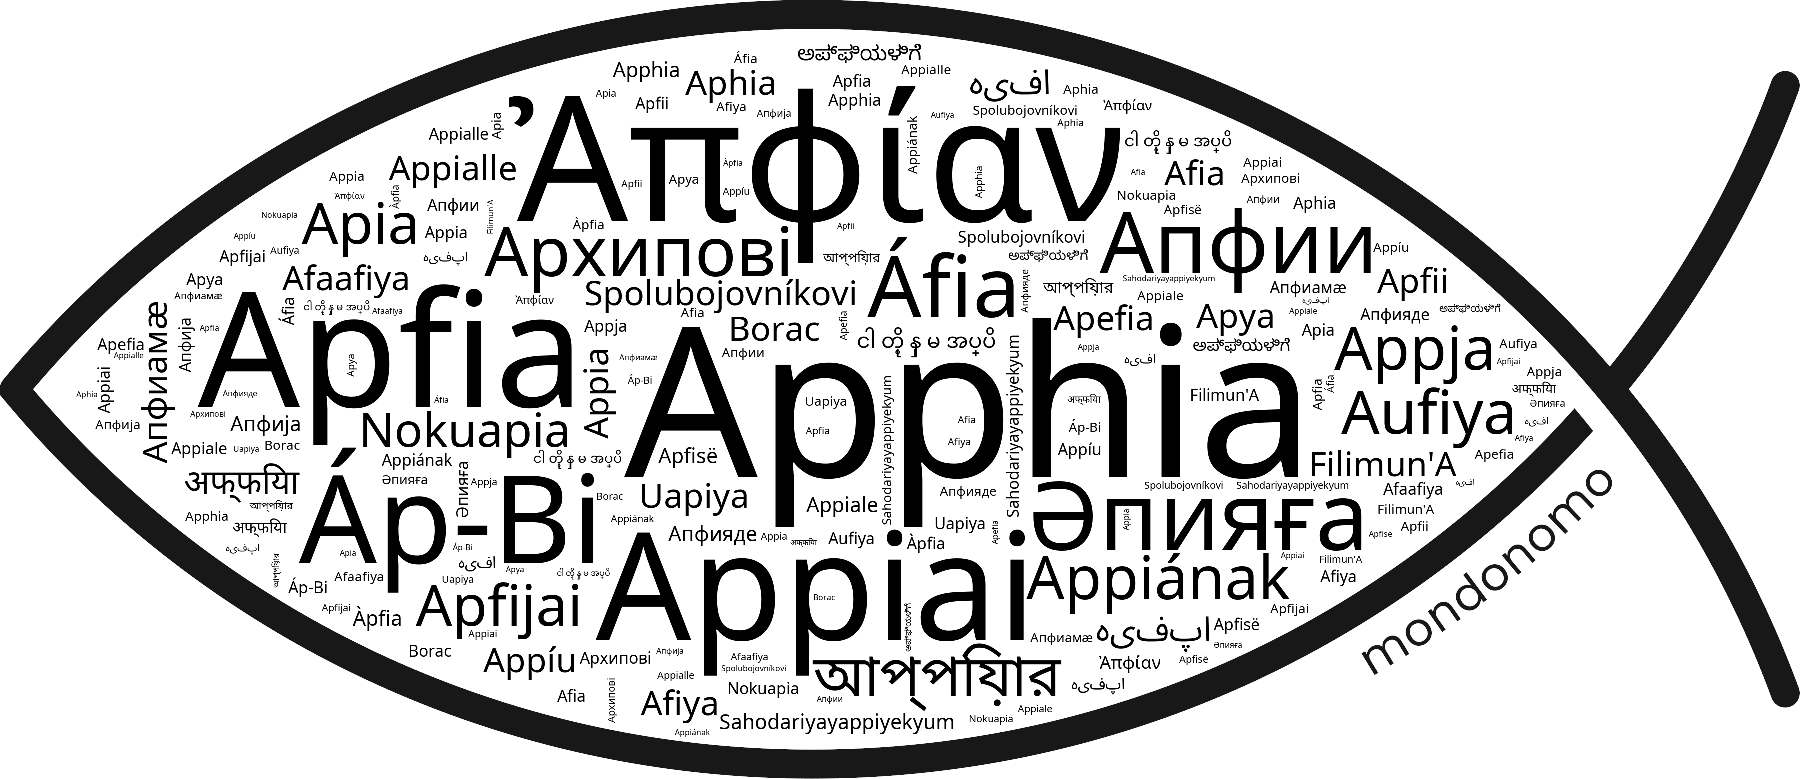 Name Apphia in the world's Bibles